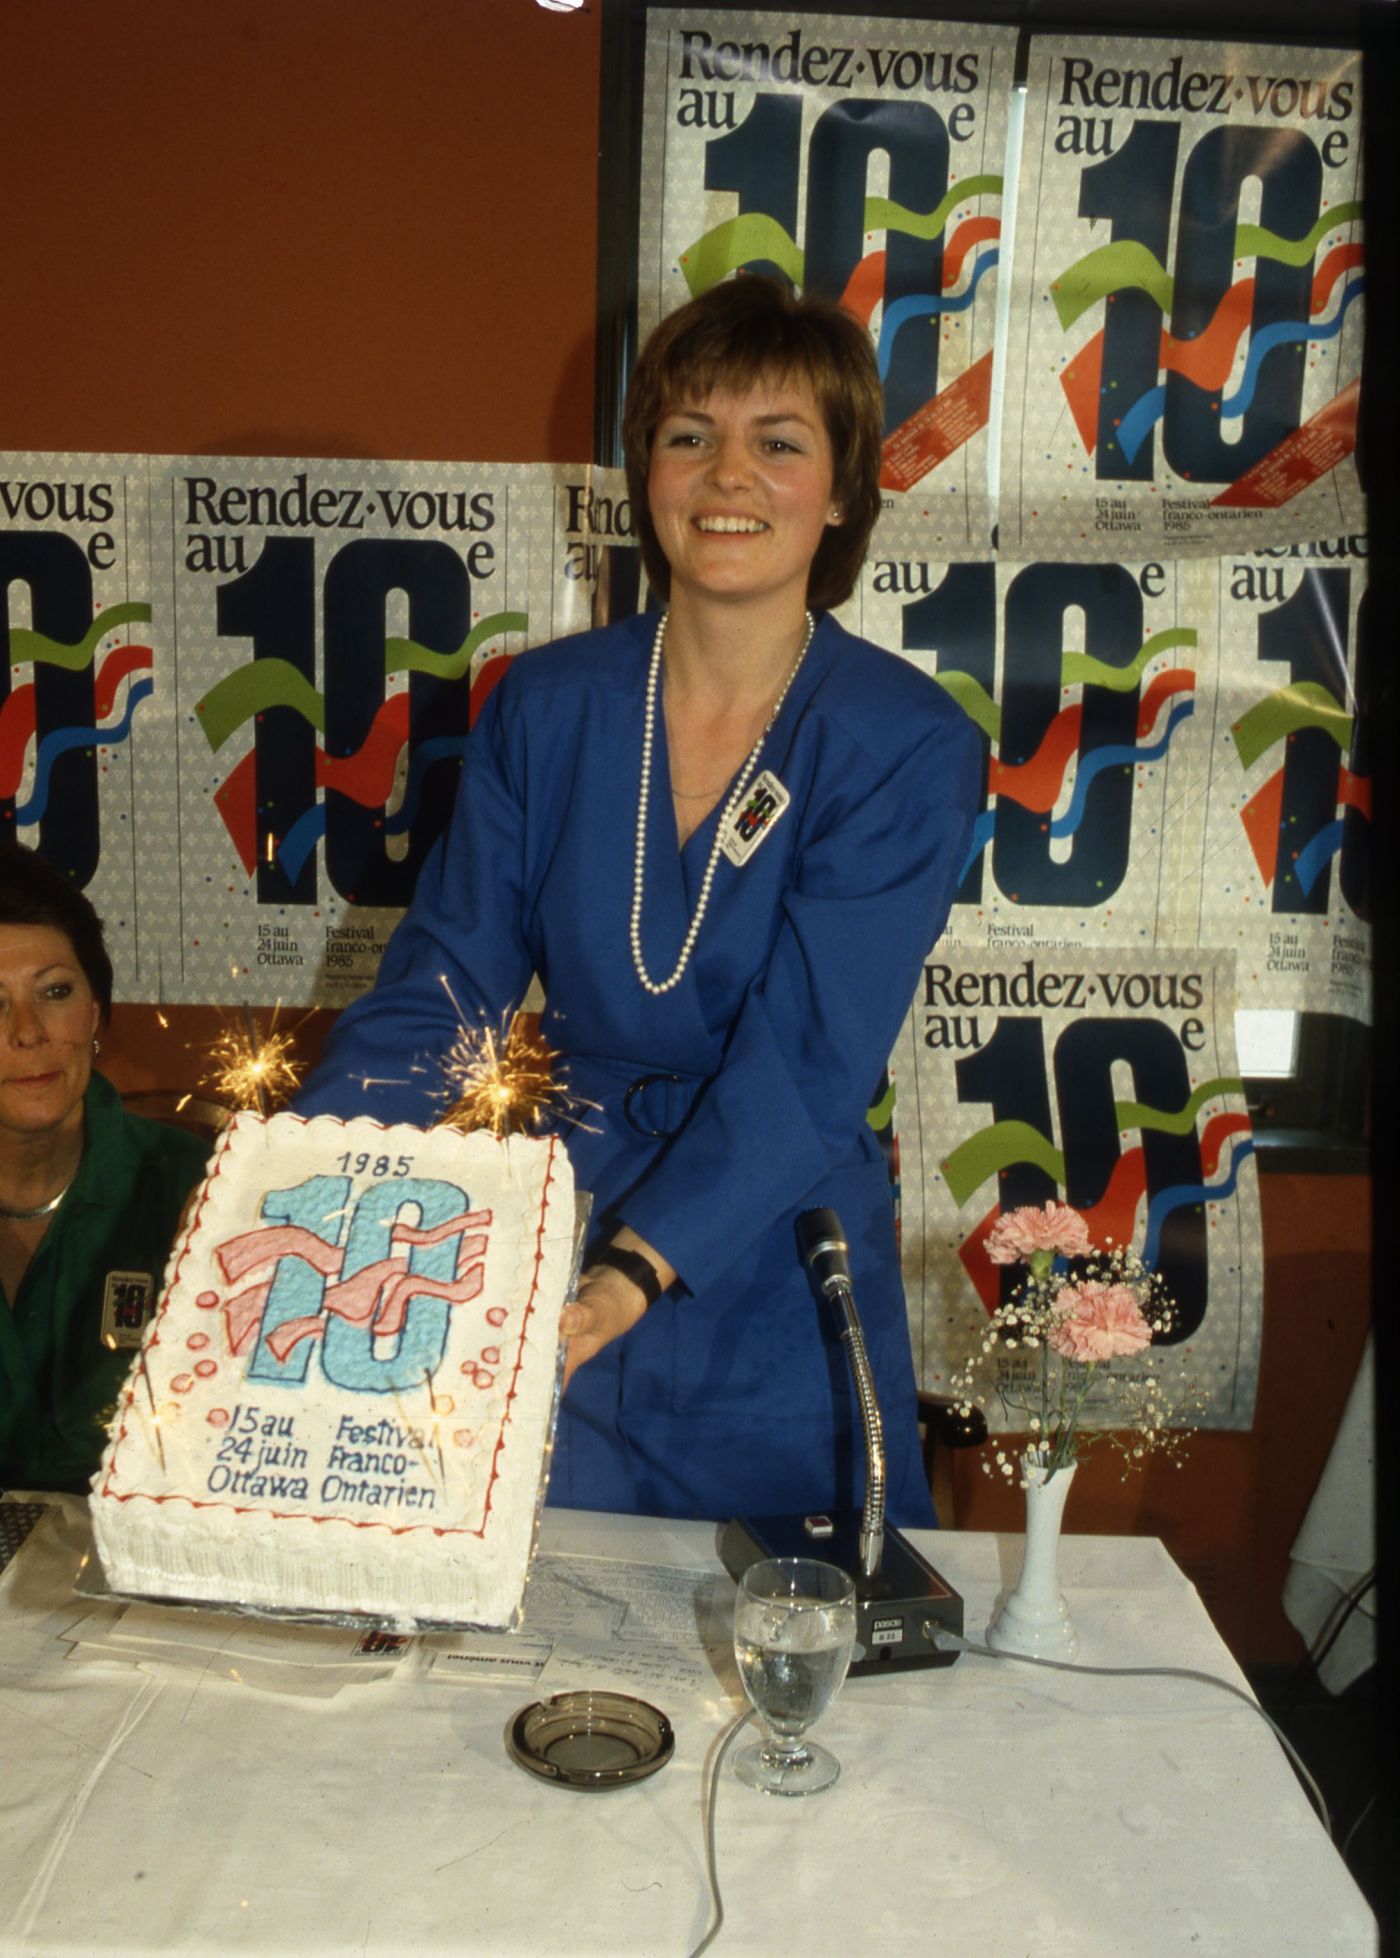 Colour photograph of a middle-aged, smiling woman with short brown hair, wearing a blue dress. She holds up a cake decorated with a large number 10, a date, and the words “Festival Franco-Ontarien.” Behind her, a wall covered with 10th anniversary promotional posters.